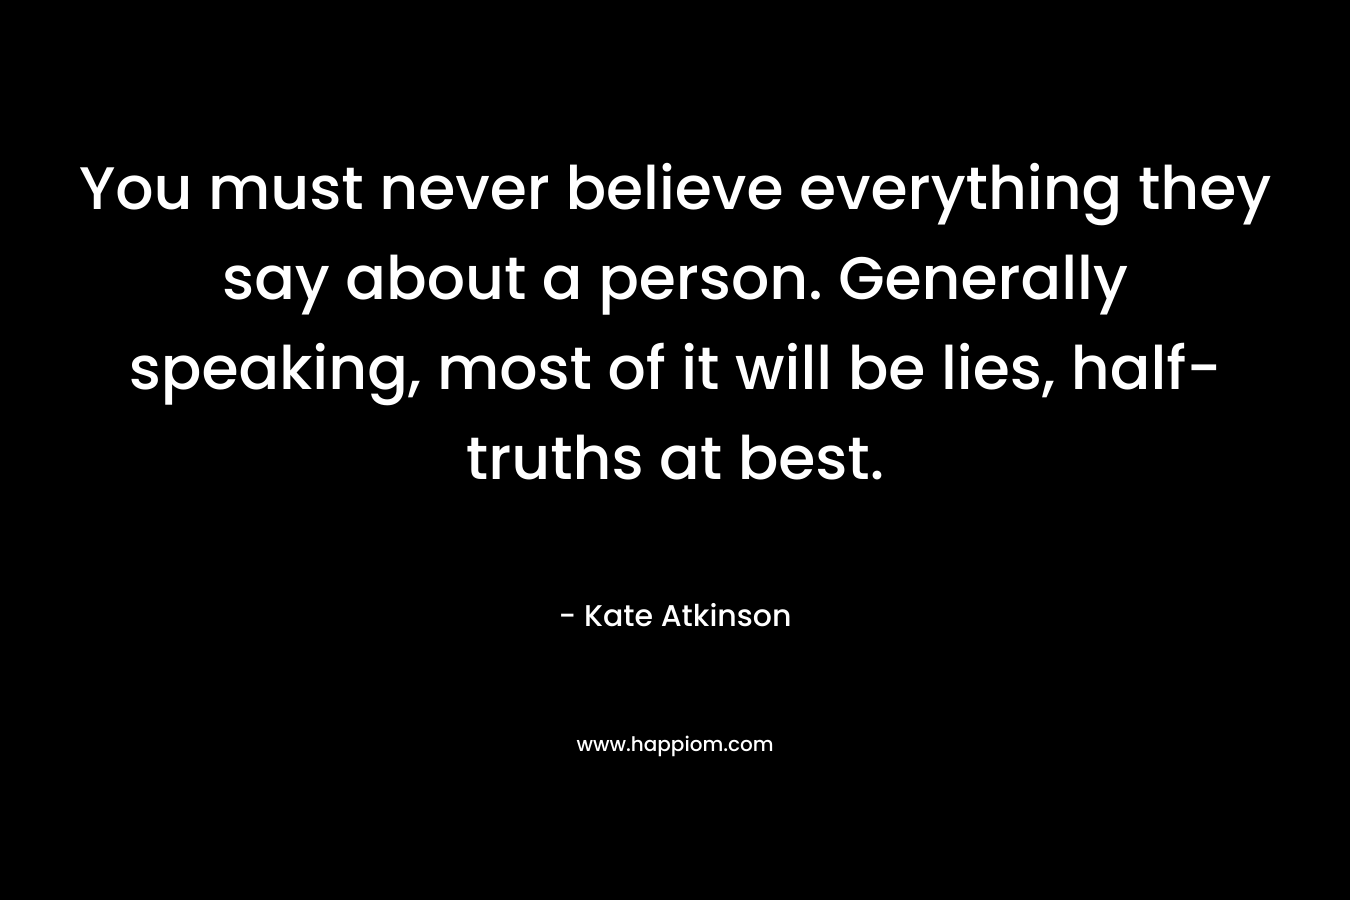 You must never believe everything they say about a person. Generally speaking, most of it will be lies, half-truths at best. – Kate Atkinson